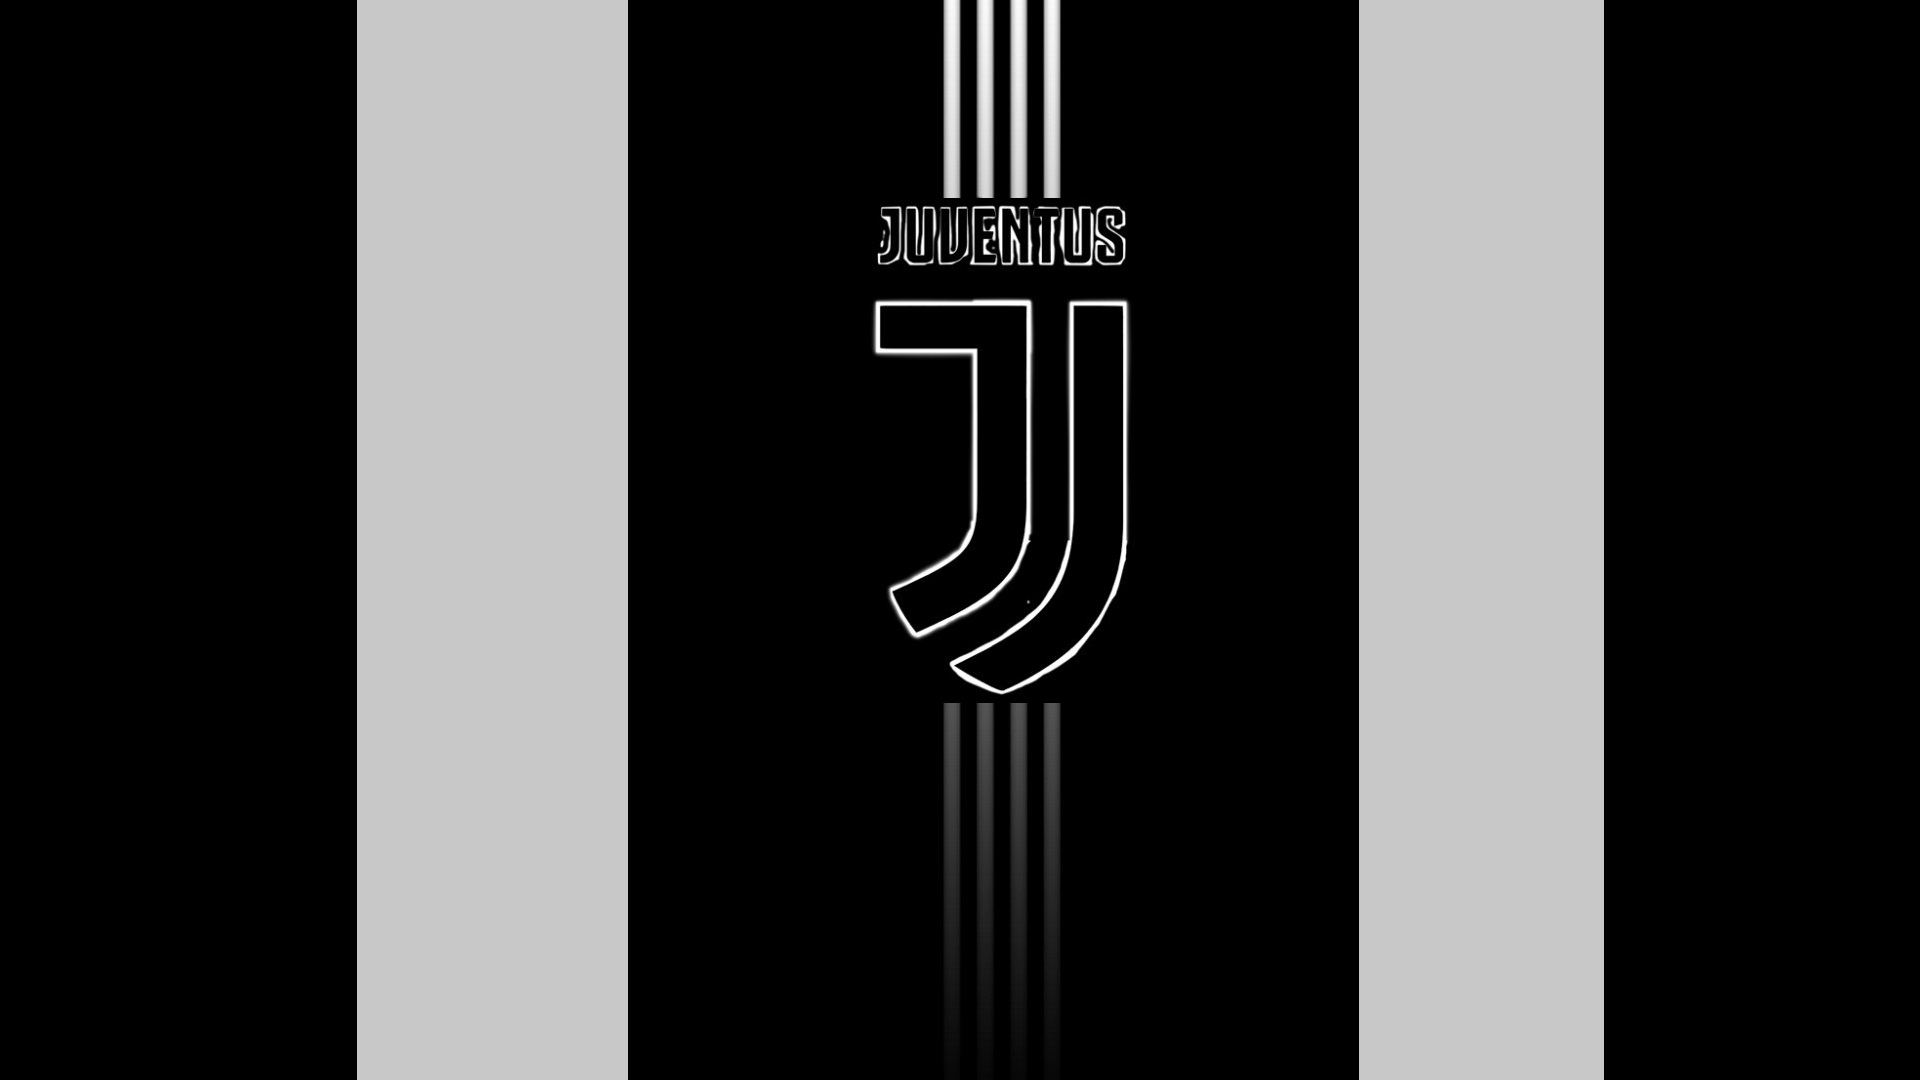 Juventus HD Wallpapers with resolution 1920x1080 pixel. You can make this wallpaper for your Mac or Windows Desktop Background, iPhone, Android or Tablet and another Smartphone device